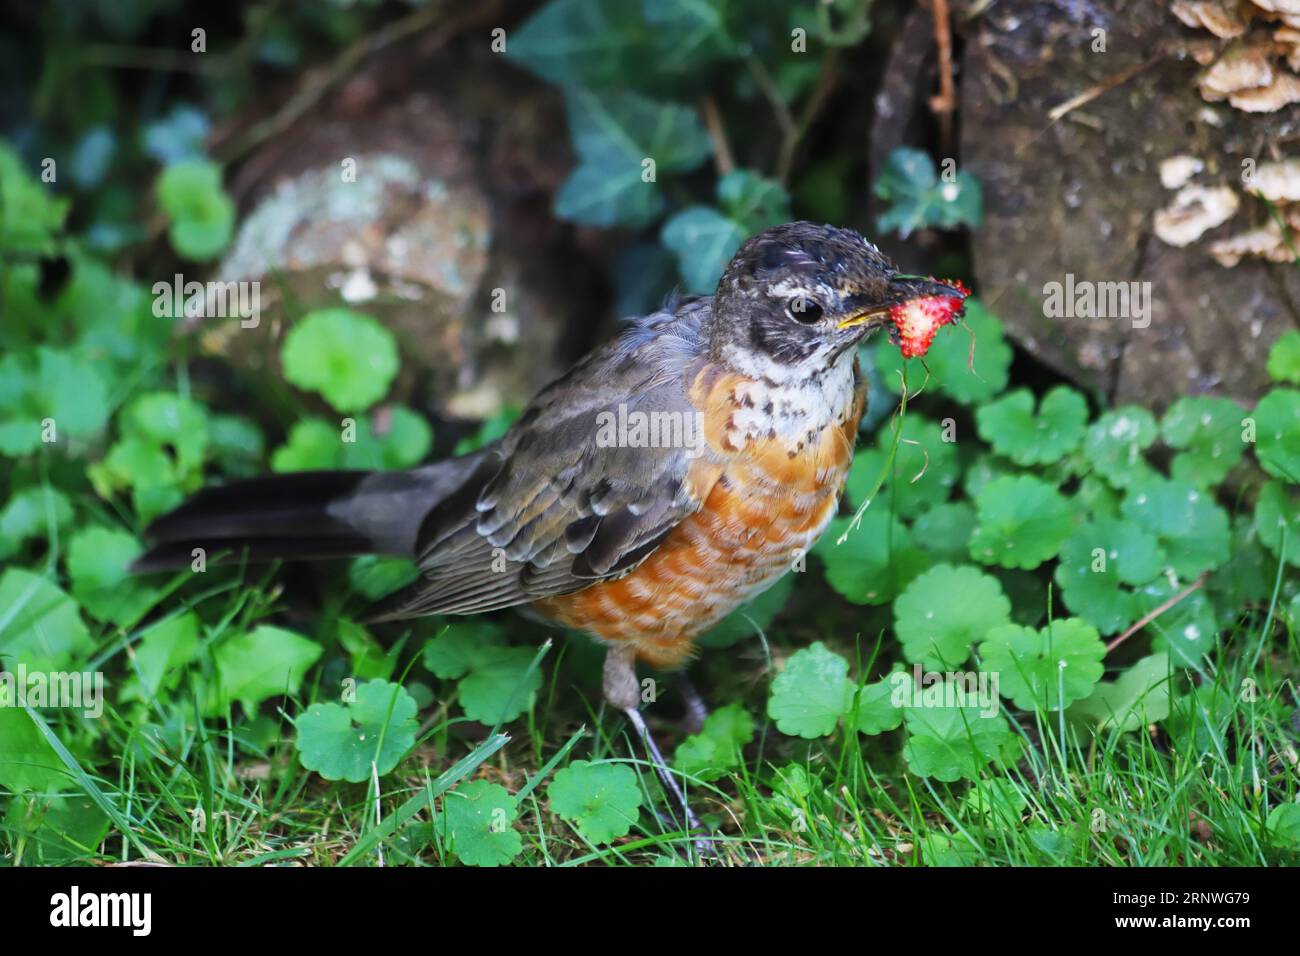 Medium close-up shot of an American robin with a wild strawberry in its mouth. Stock Photo